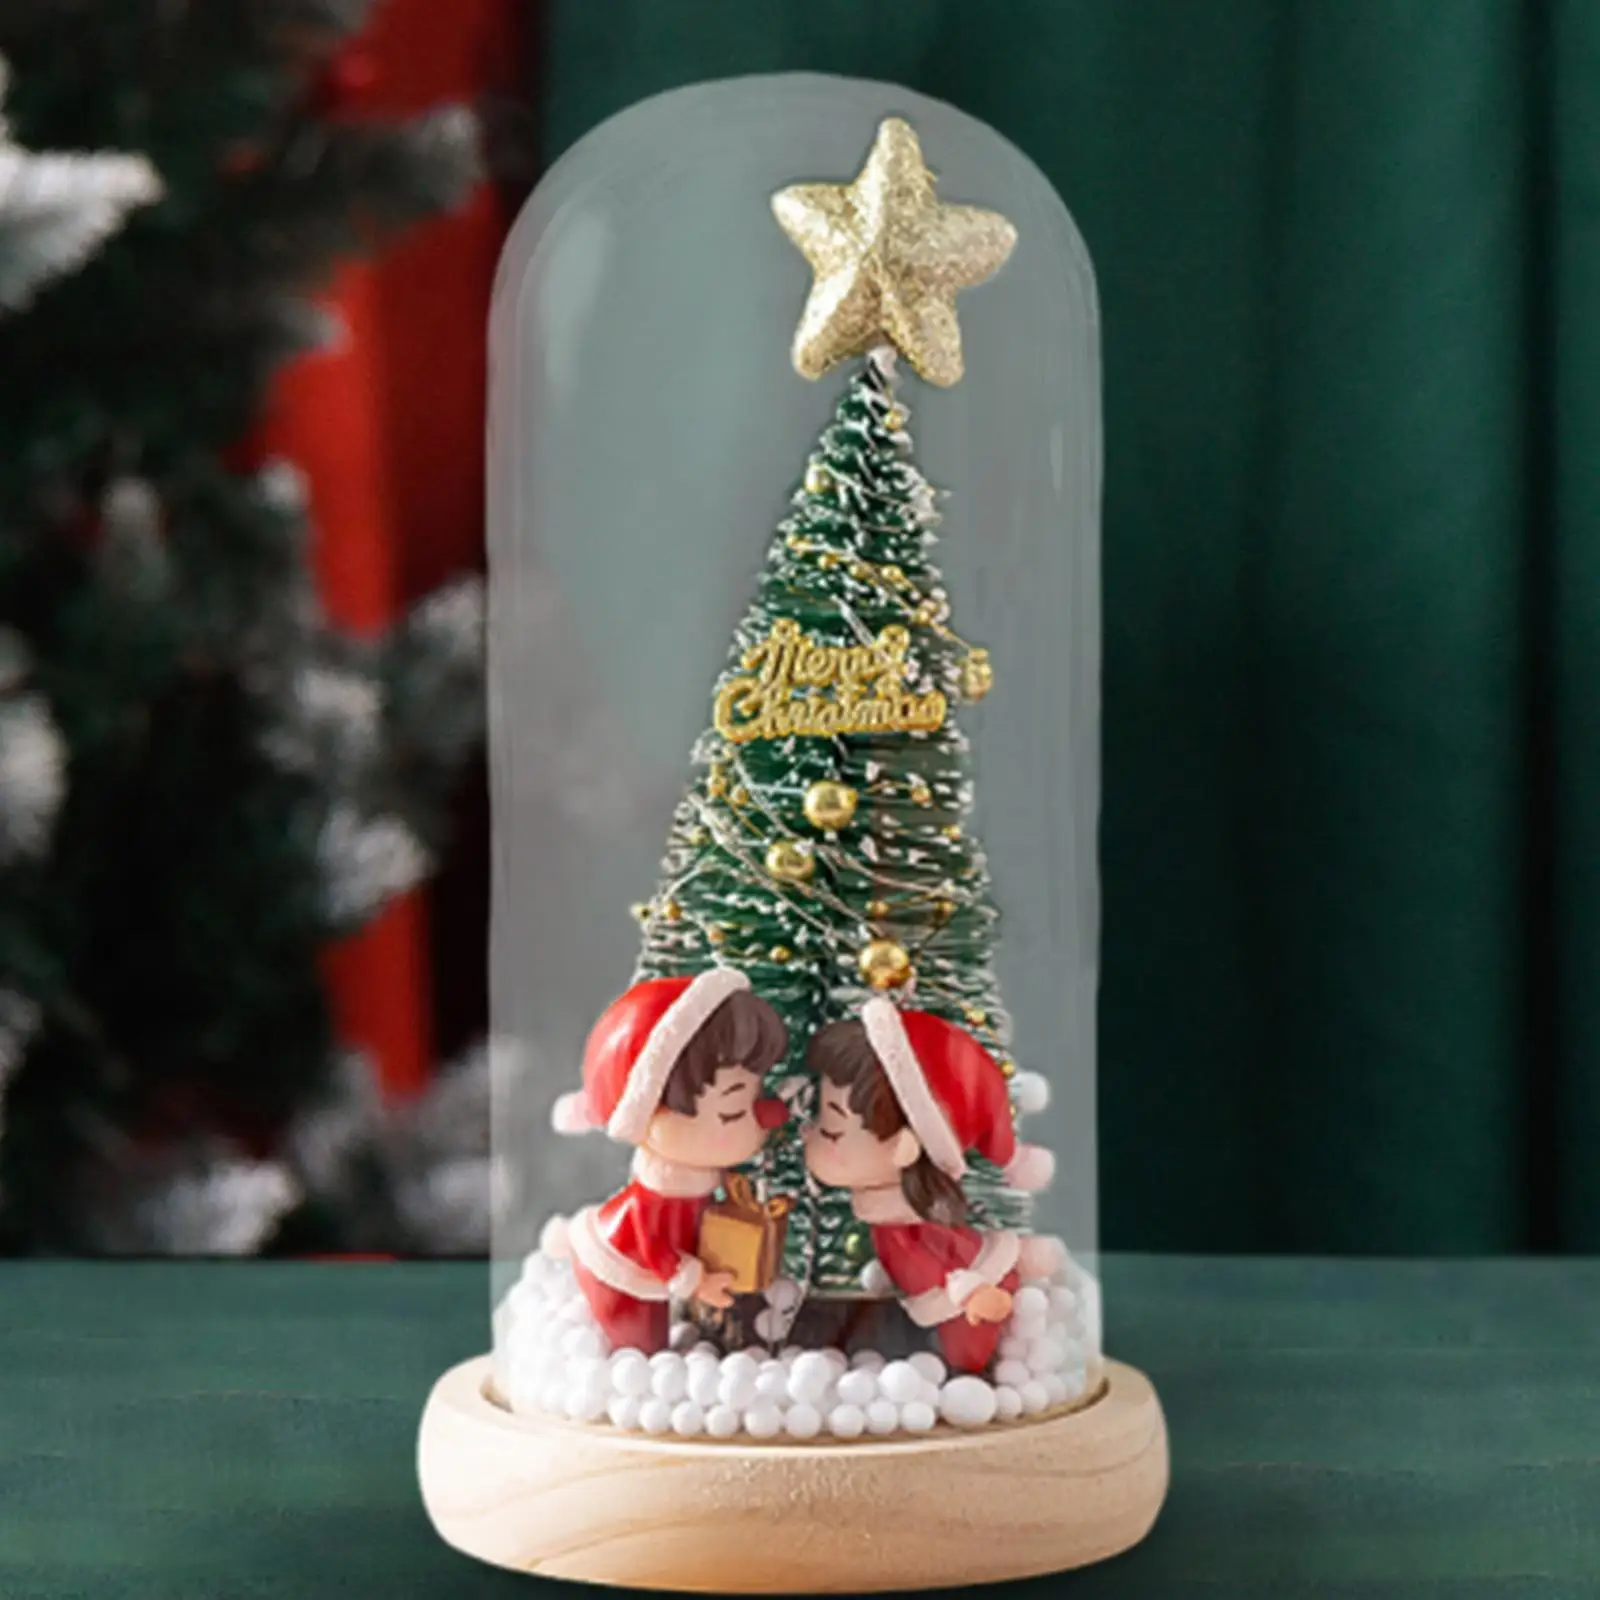 Mini Tabletop Christmas Tree with Light Simulation Christmas Ornament Crafts for Party Supplies Bars Desktop Fireplace Holiday